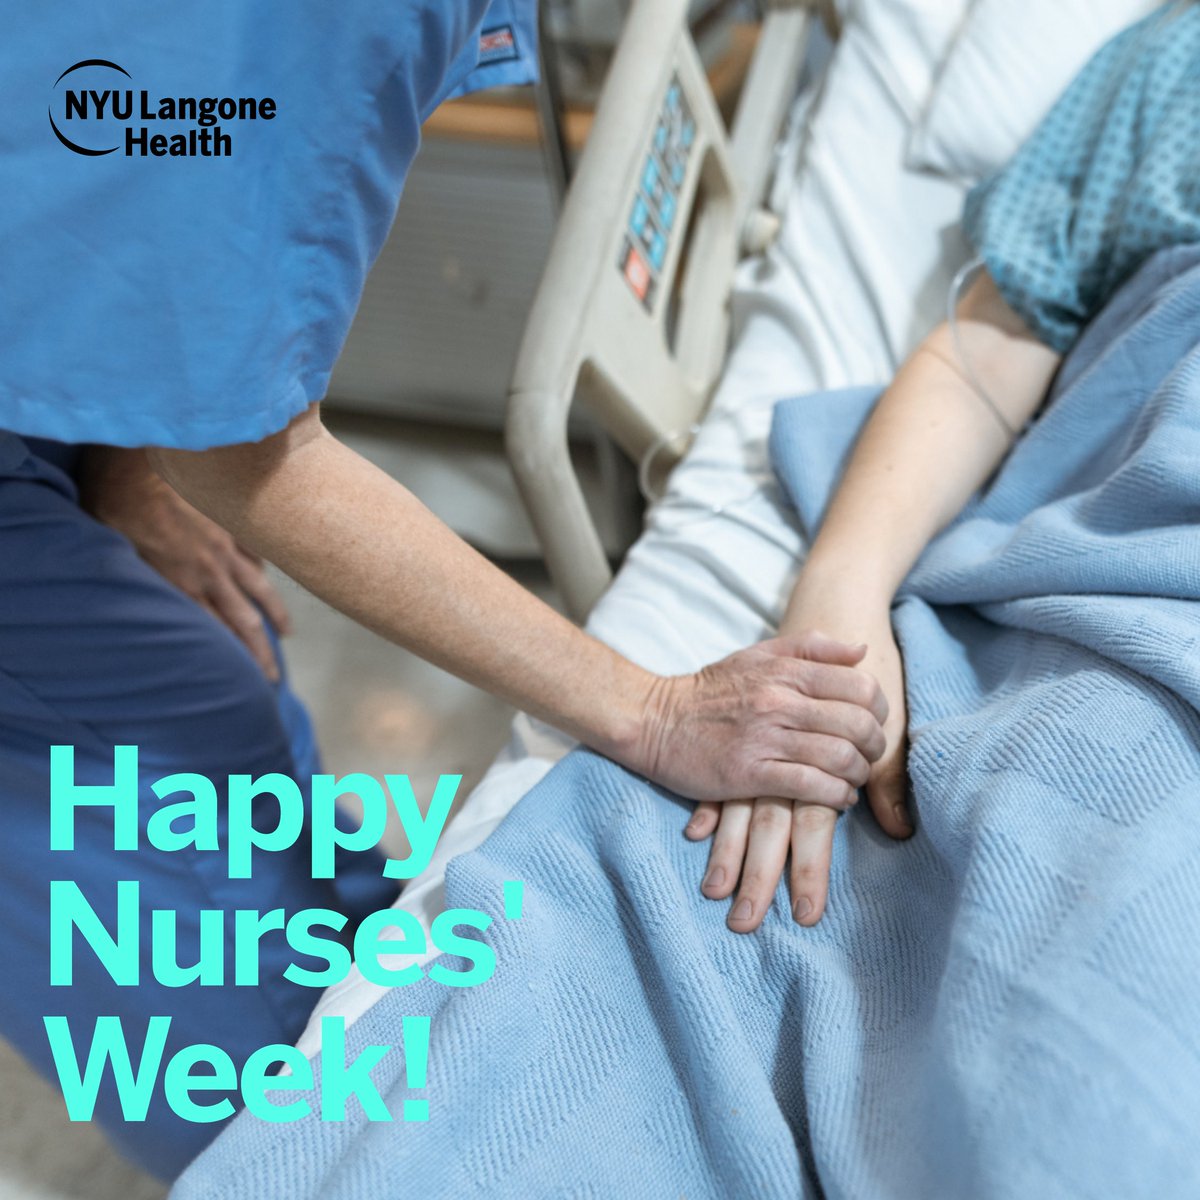 Today we celebrate our heroes in scrubs. We express our gratitude for nurses @nyulangone and beyond- not just today, but each and every day. 🩺💕 #NursesWeek